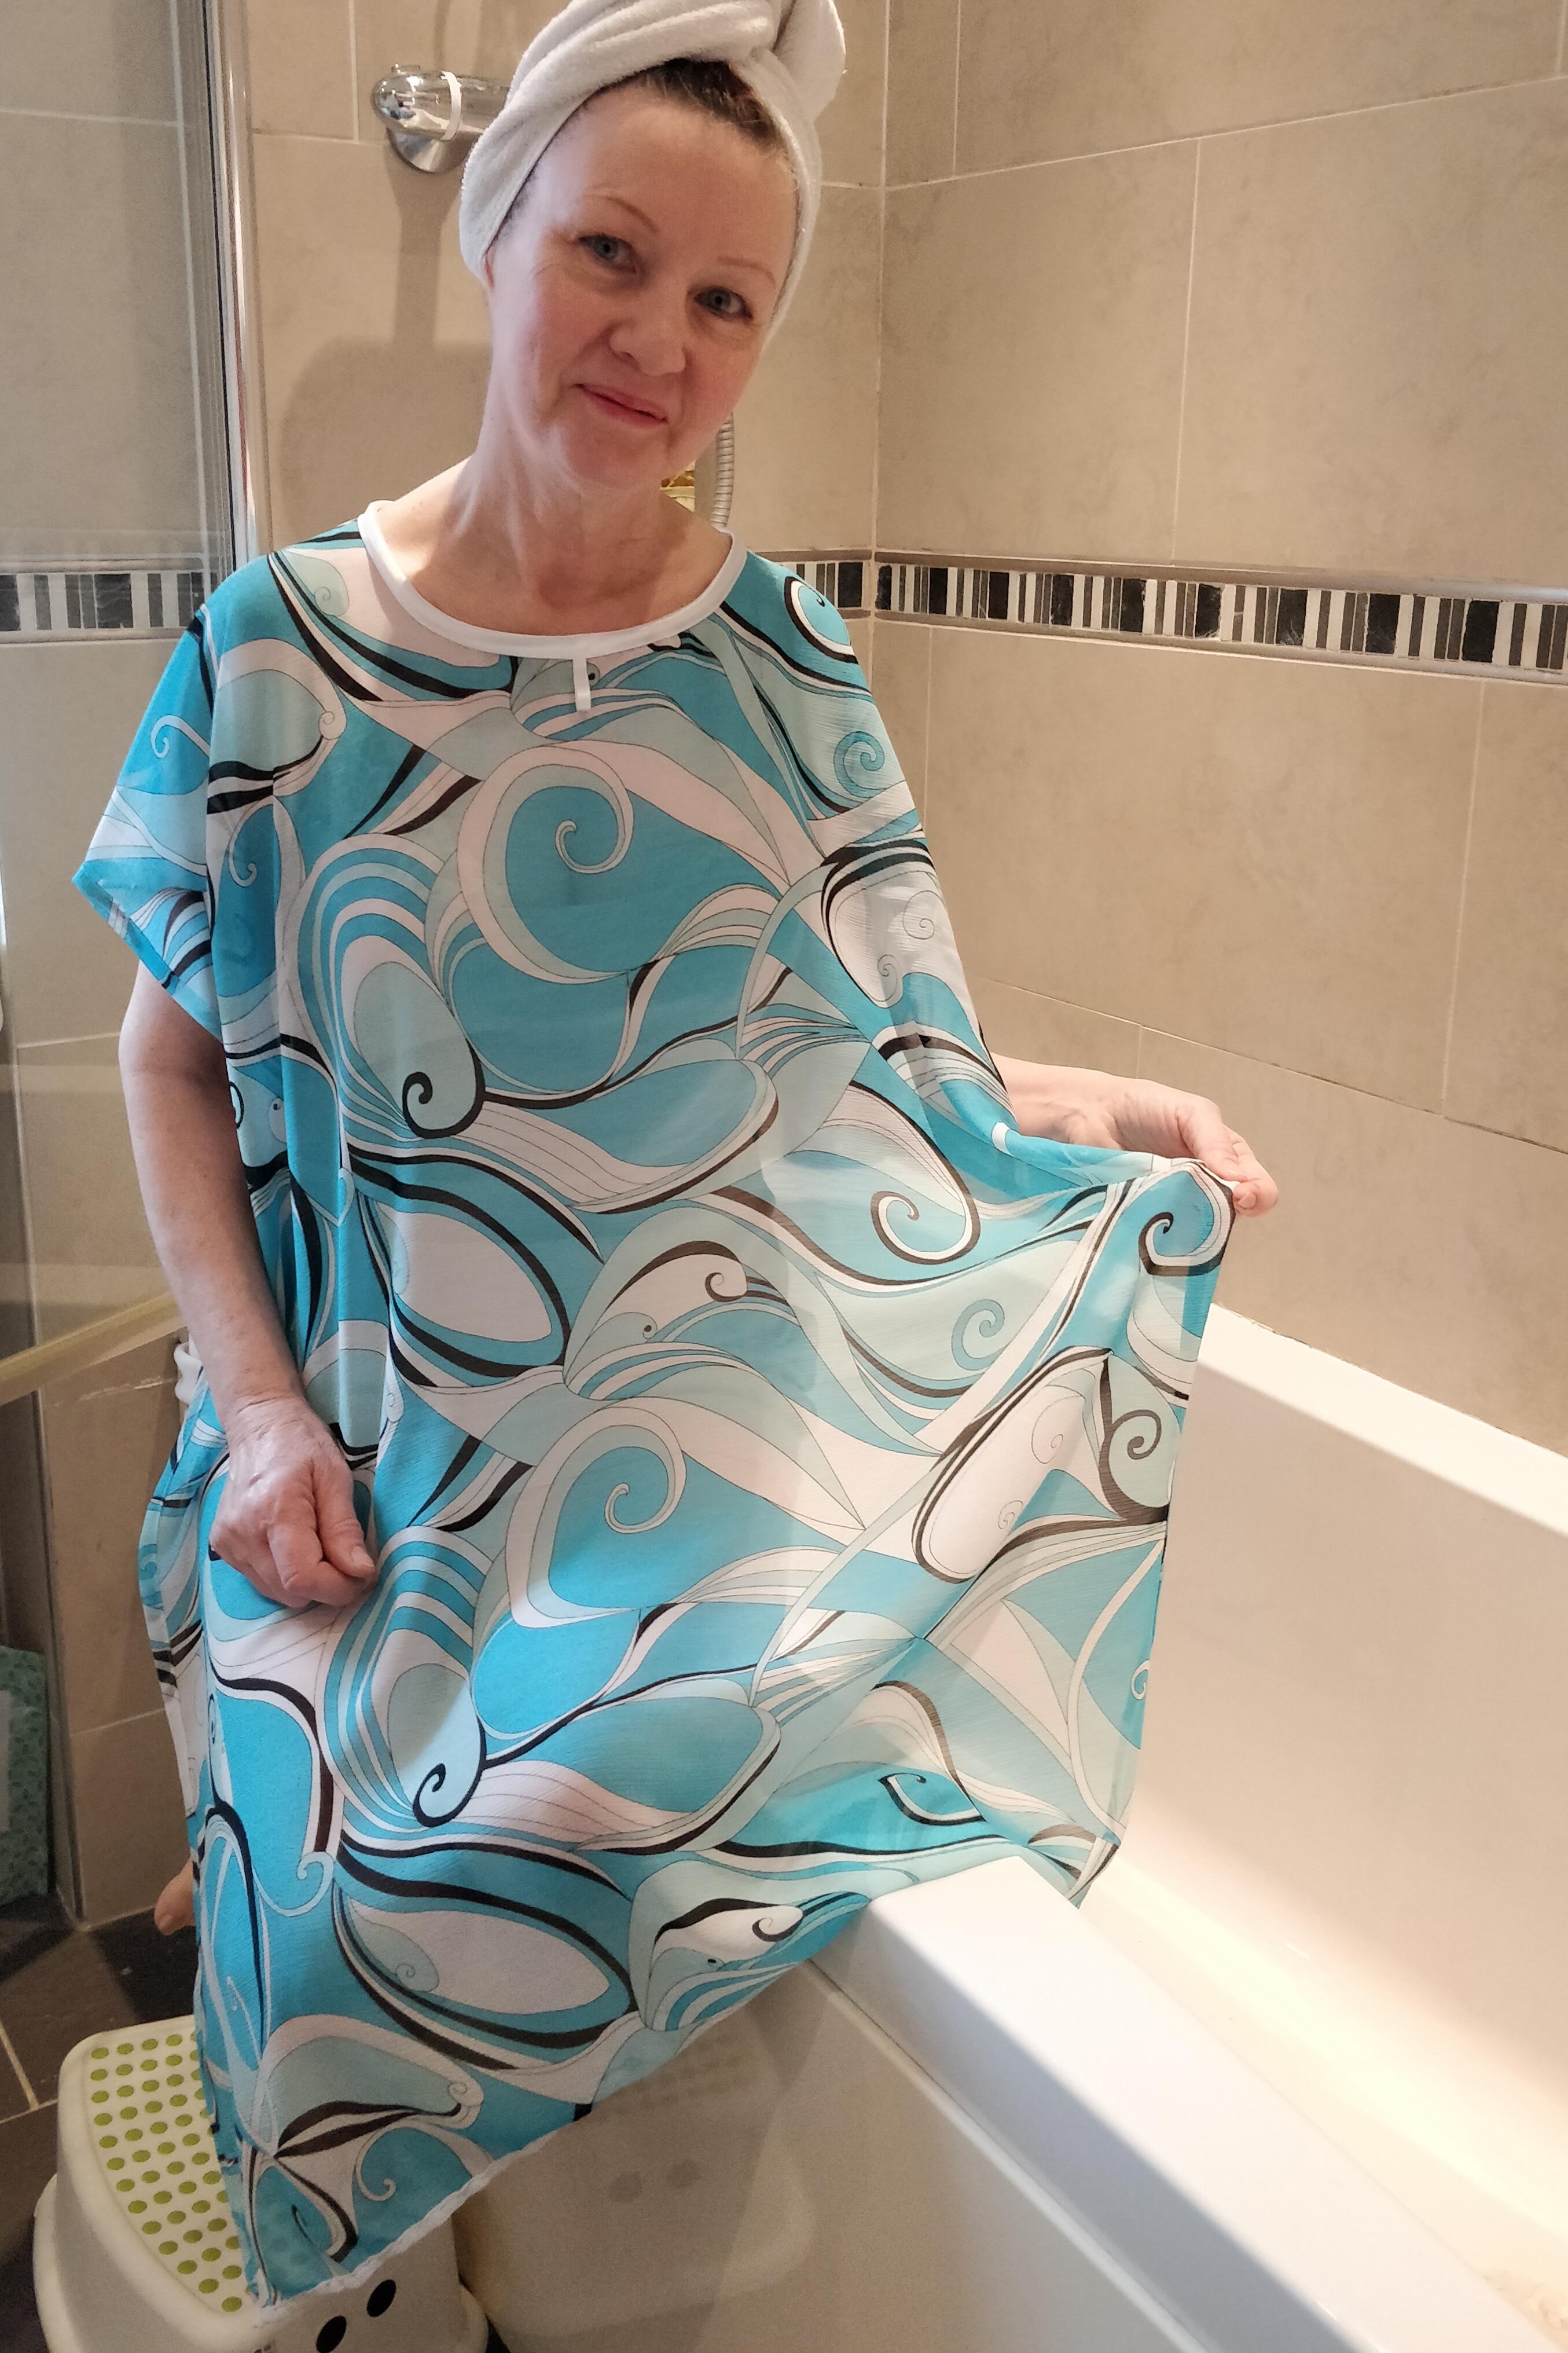 Turquoise Swirl NeverNaked(tm) Shower Drapron® to provide modesty, dignity and privacy whilst being helped to shower or bathe. Shower modesty wear. Bathing modesty gown. Lightweight crepe chiffon. Slips over shoulders - No sleeves Magnetic fastening at back